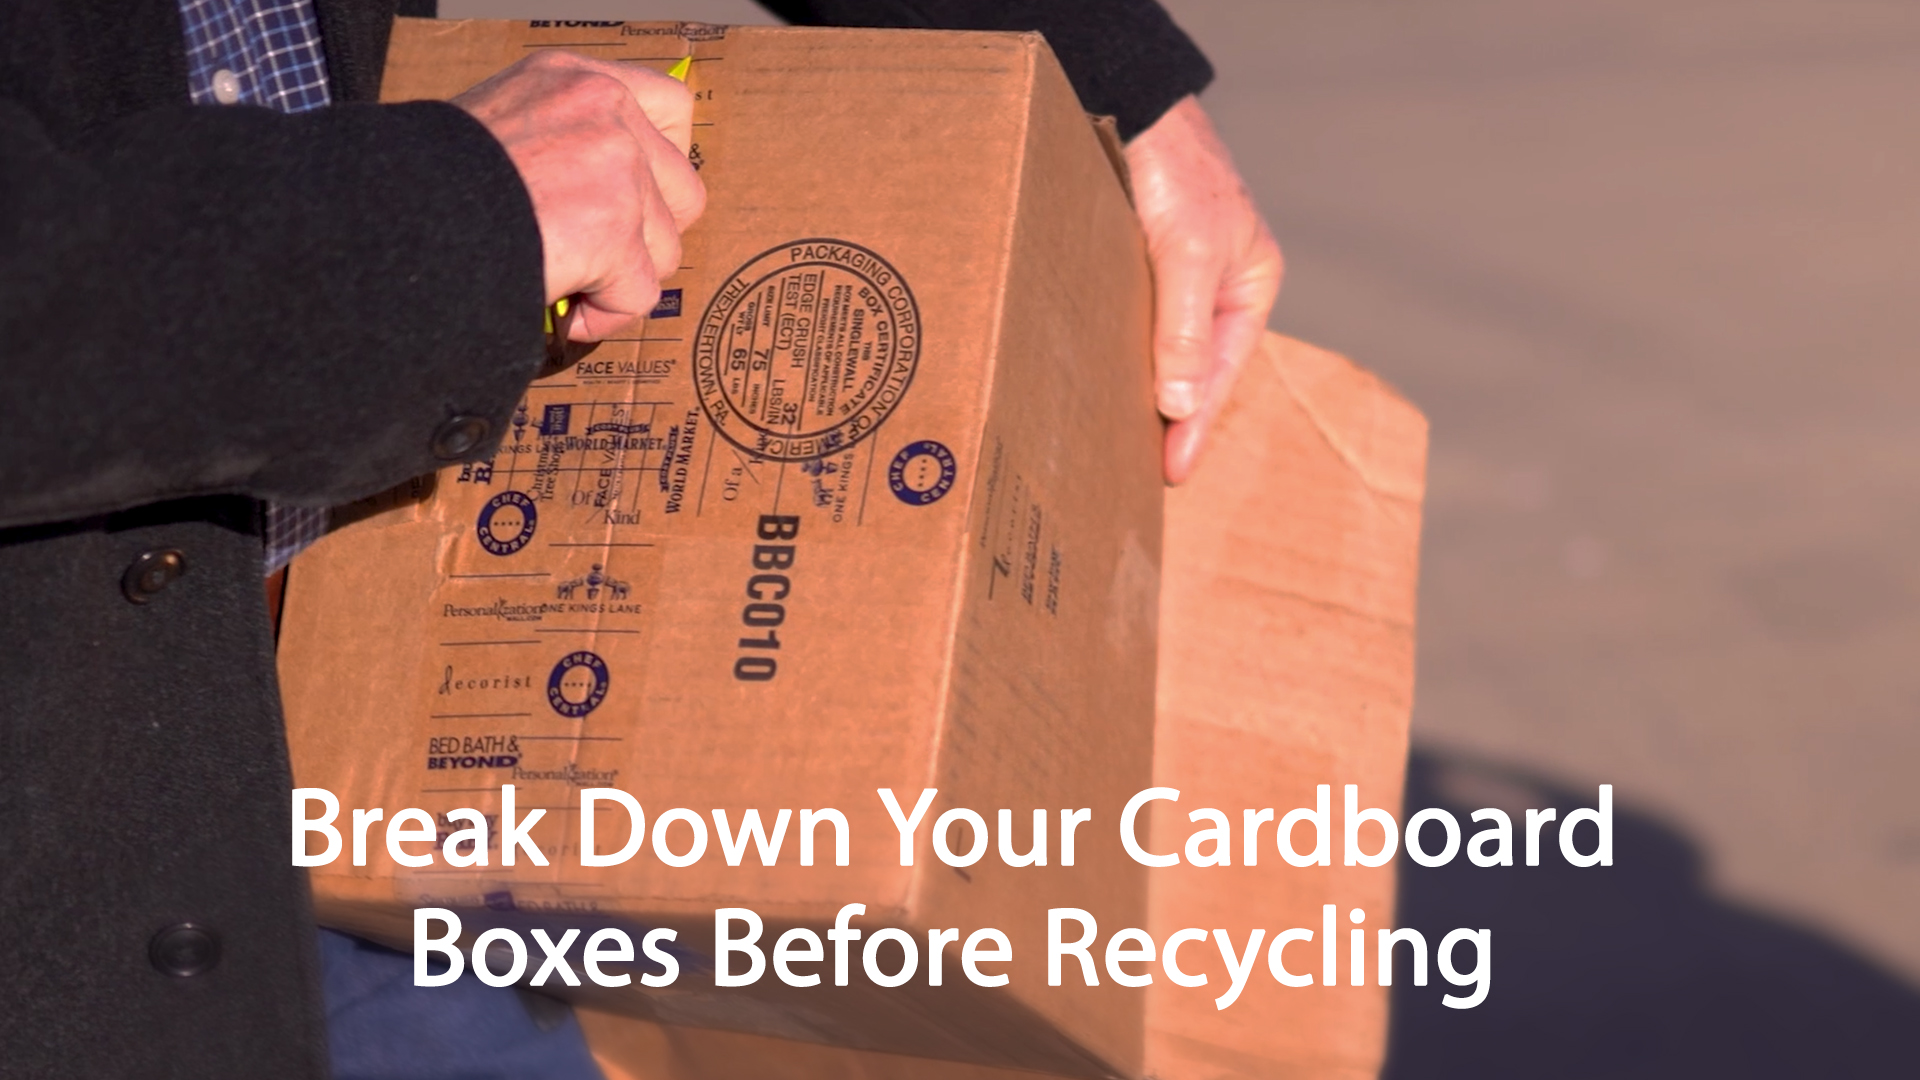 Break Down Your Cardboard Boxes Before Recycling